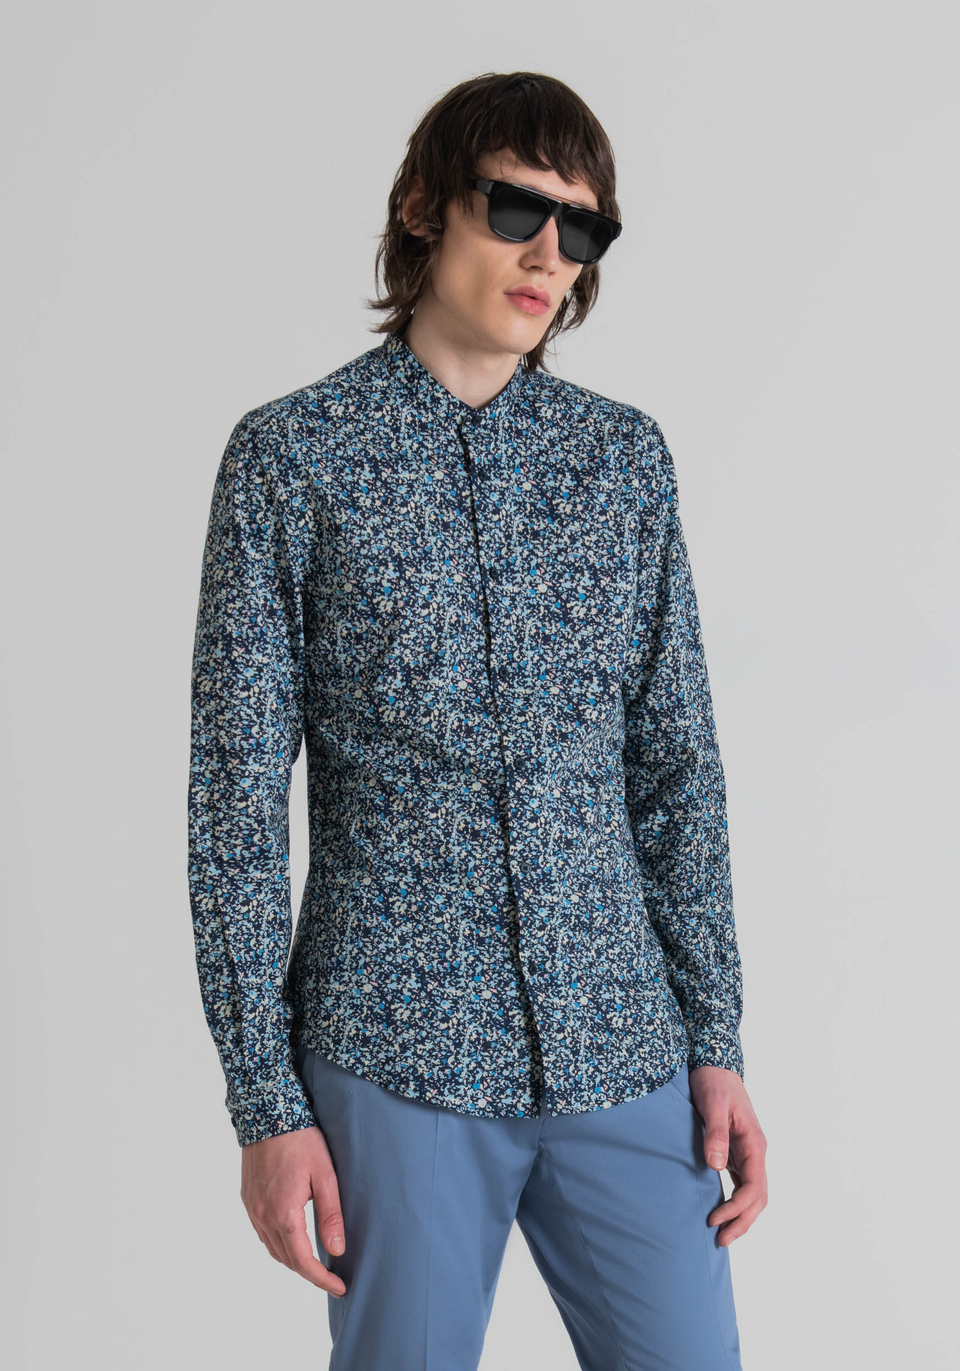 "SEUL" SLIM-FIT SHIRT IN SOFT-TOUCH COTTON WITH MICROPATTERN - Antony Morato Online Shop